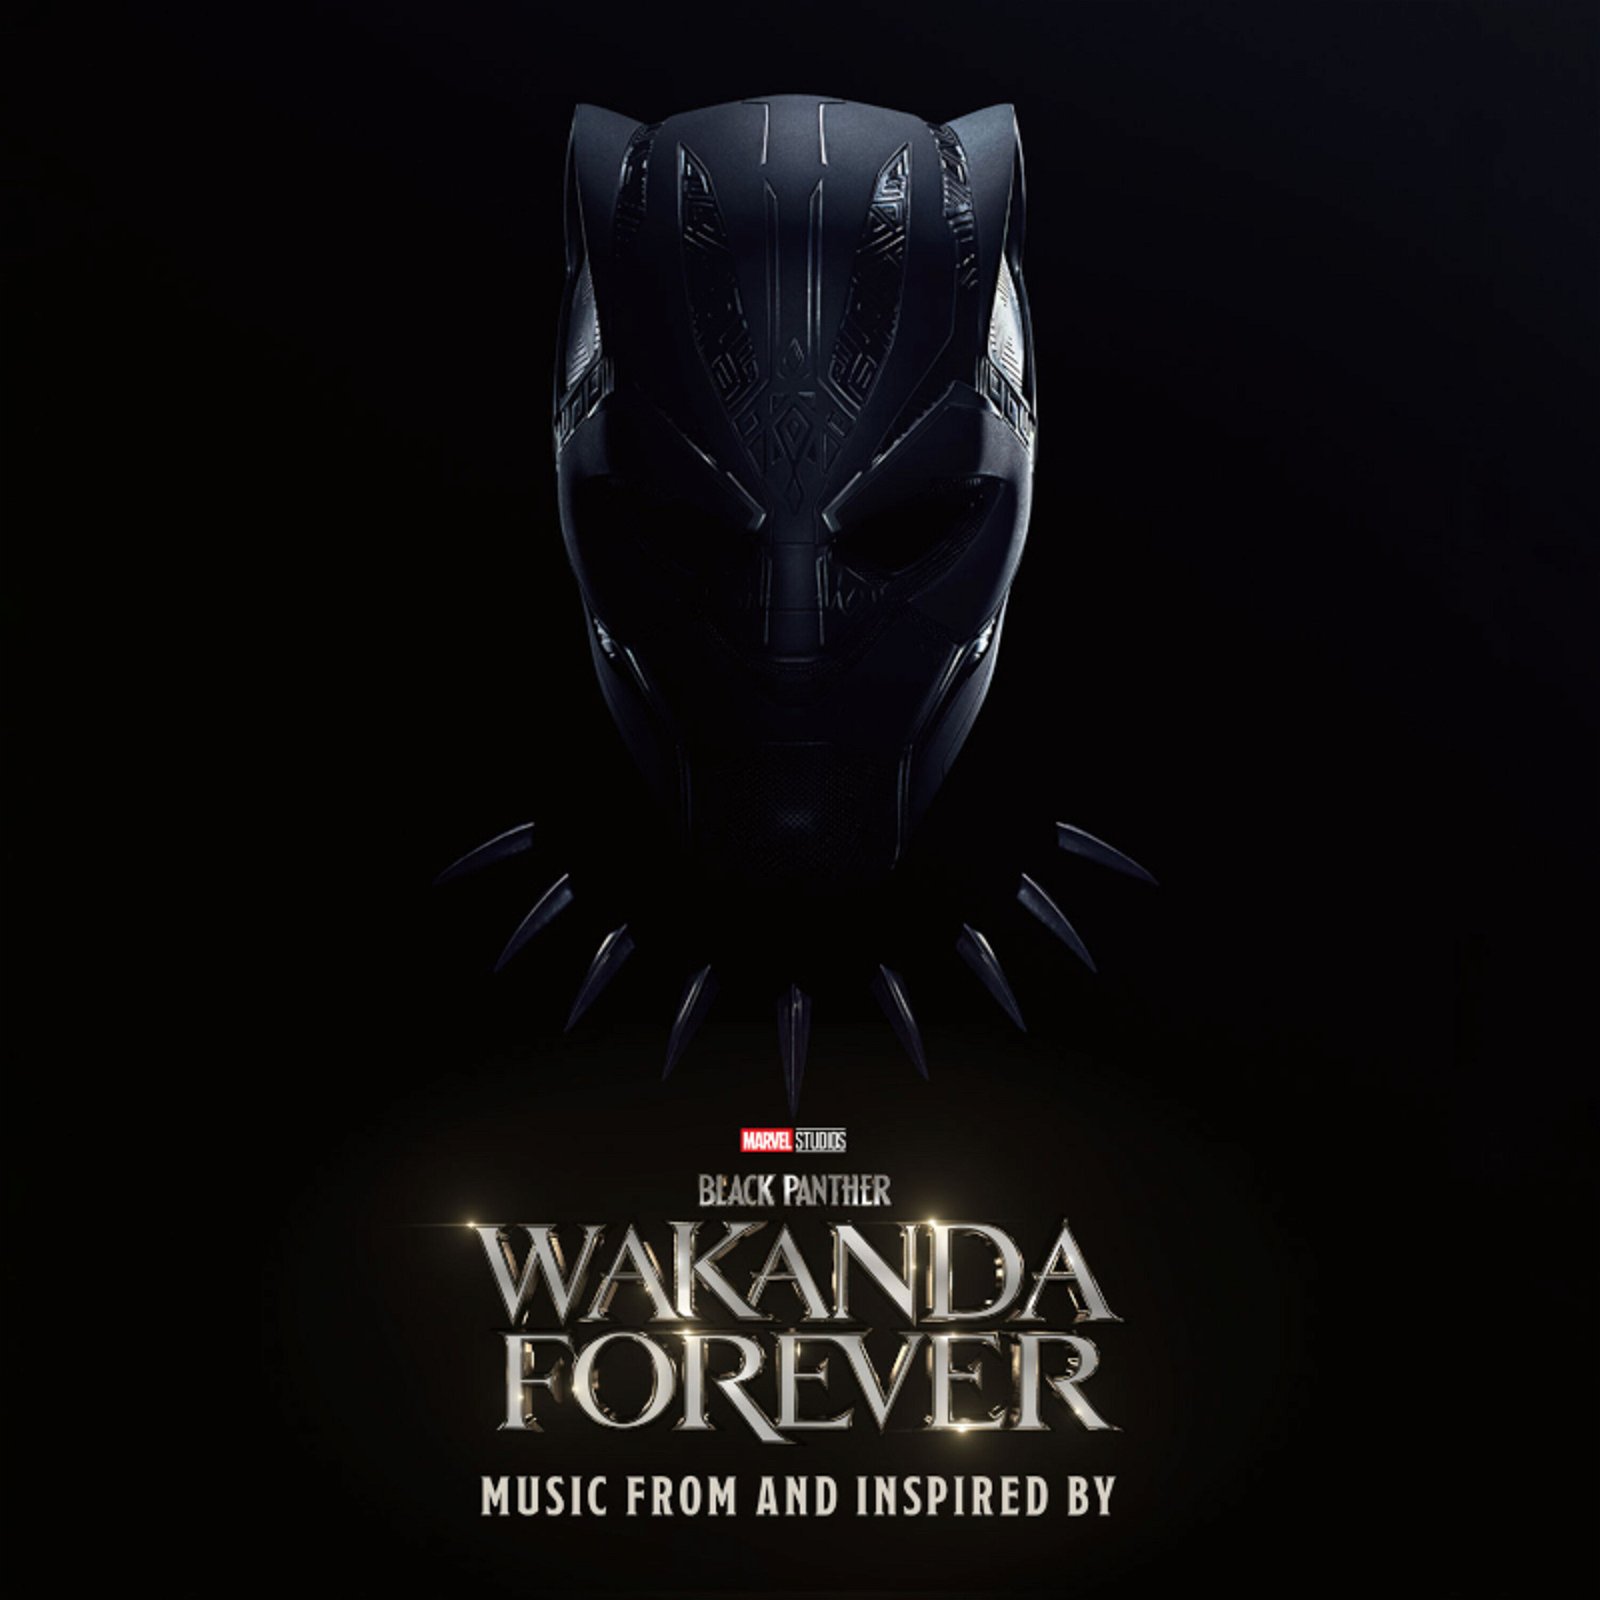 CD Shop - SOUNDTRACK Black Panther: Wakanda Forever - Music From and Inspired By